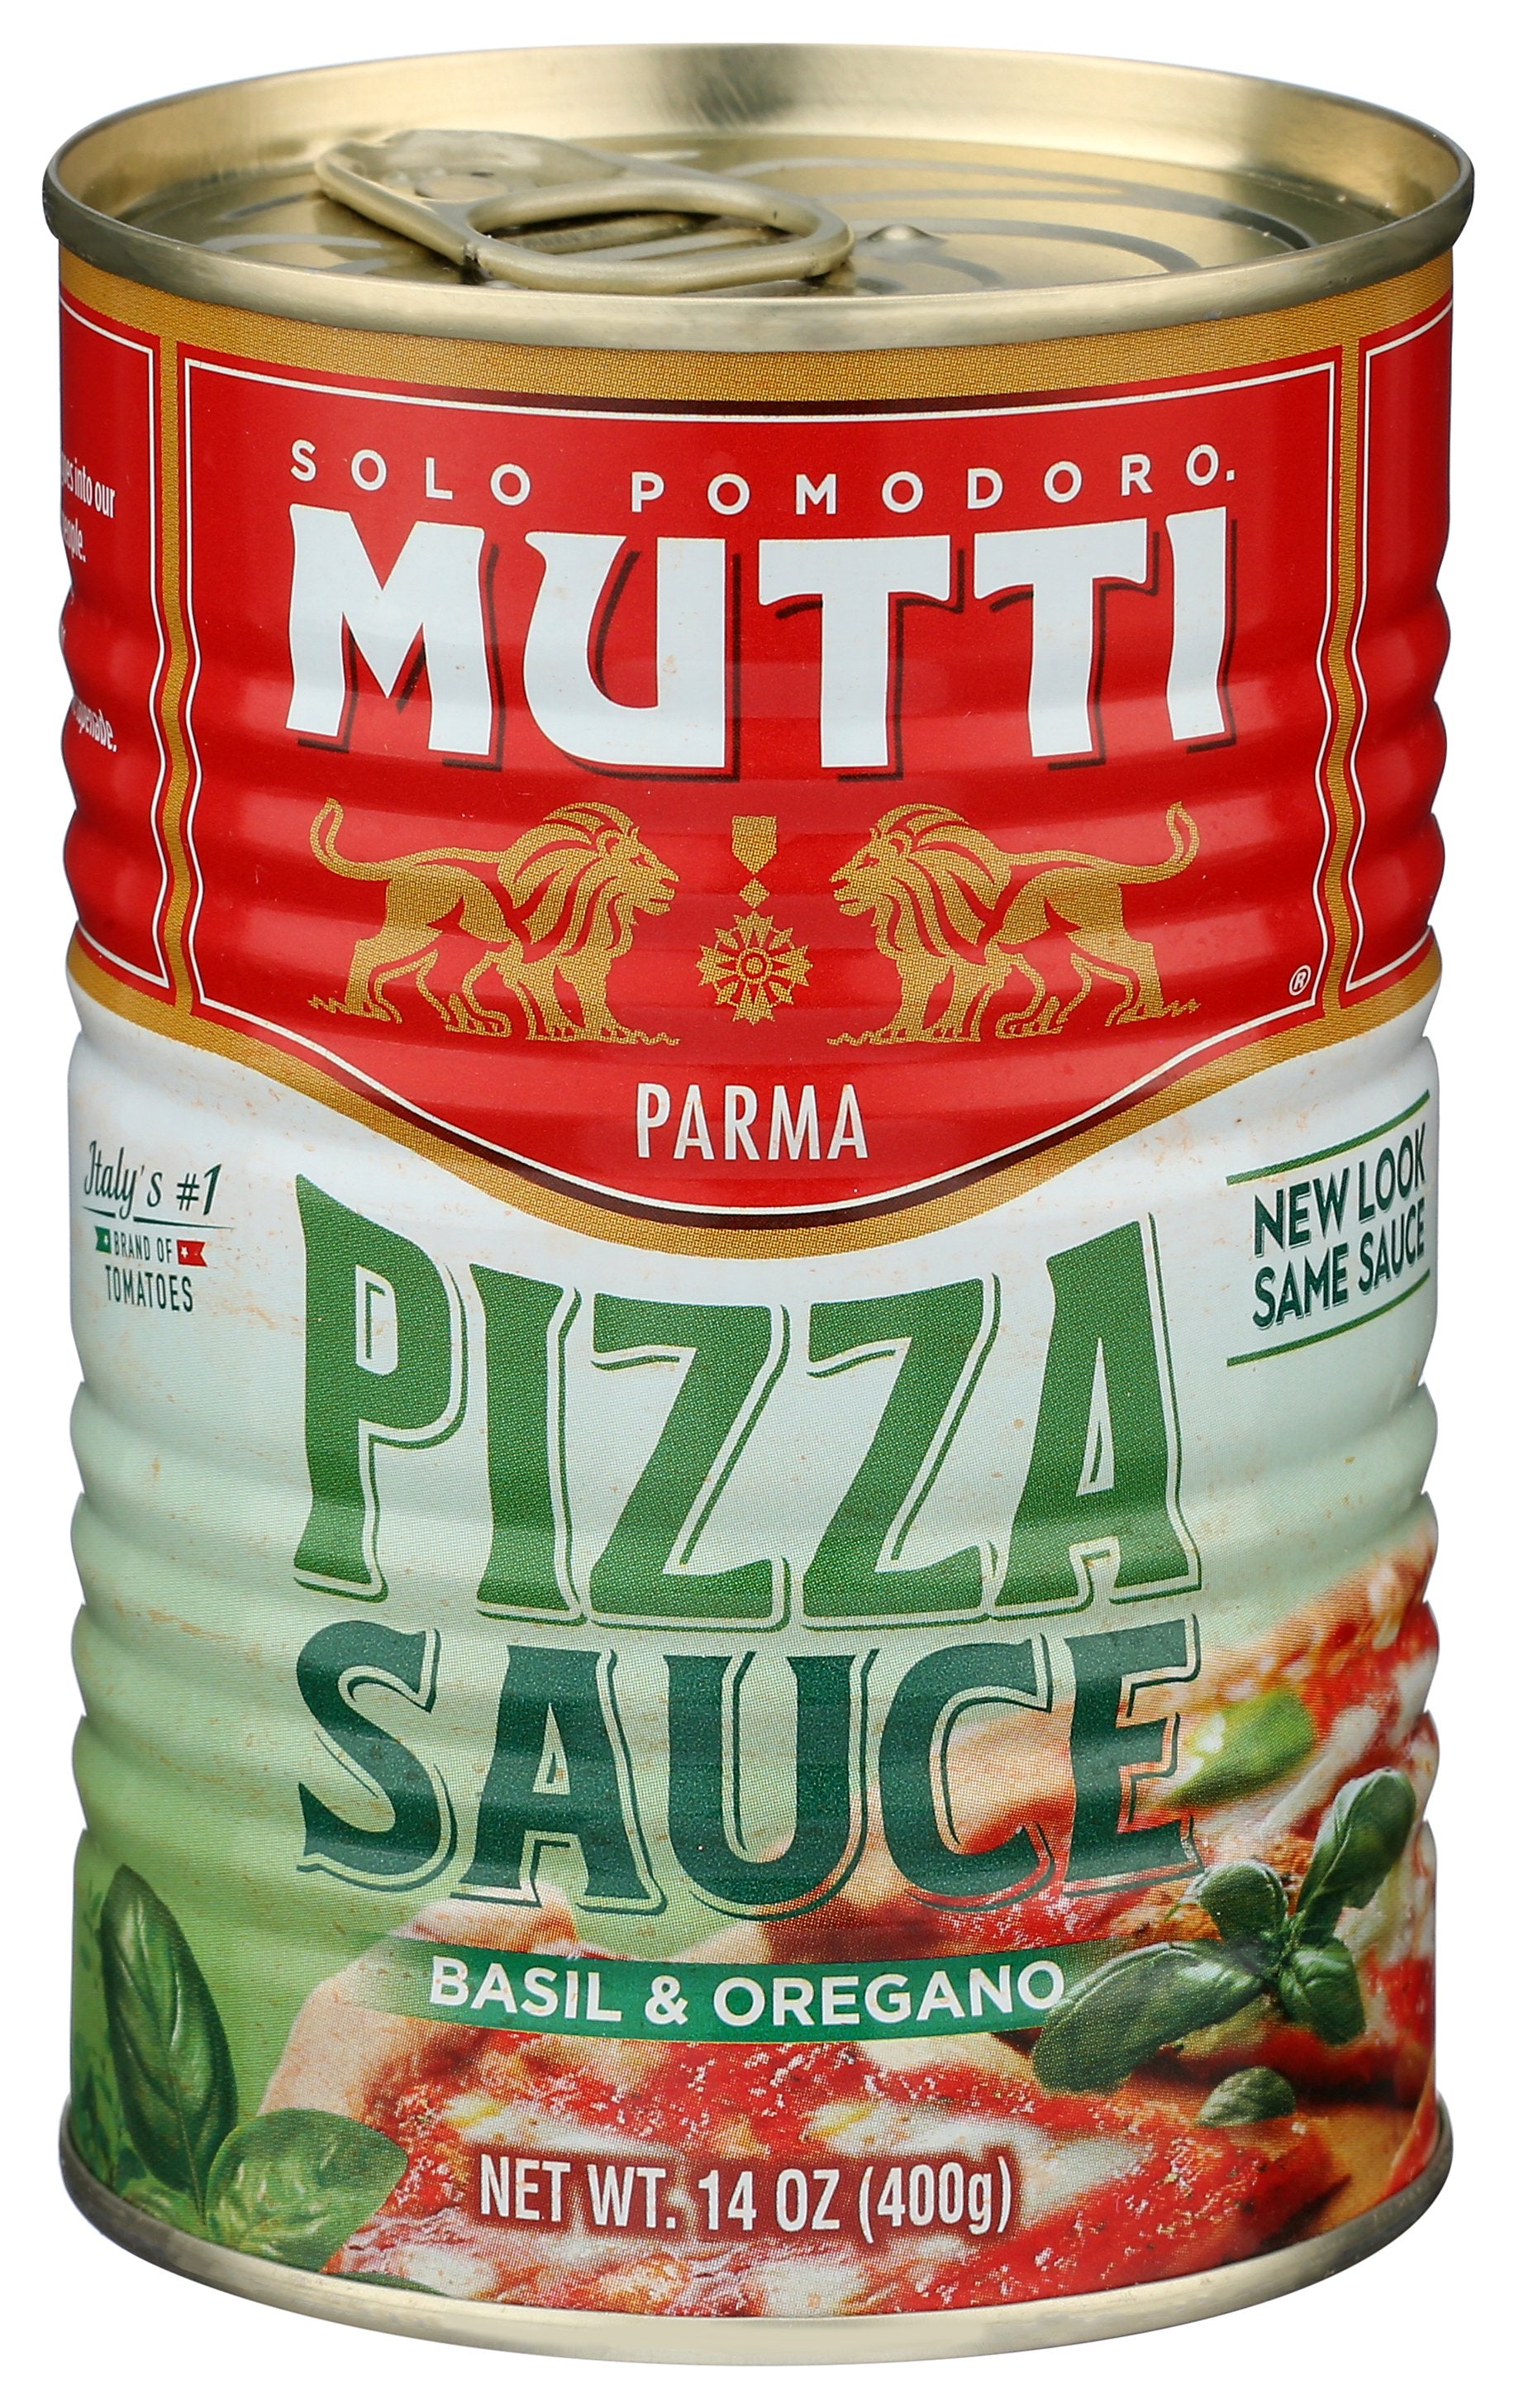 MUTTI PIZZA SAUCE & SPICES - Case of 6